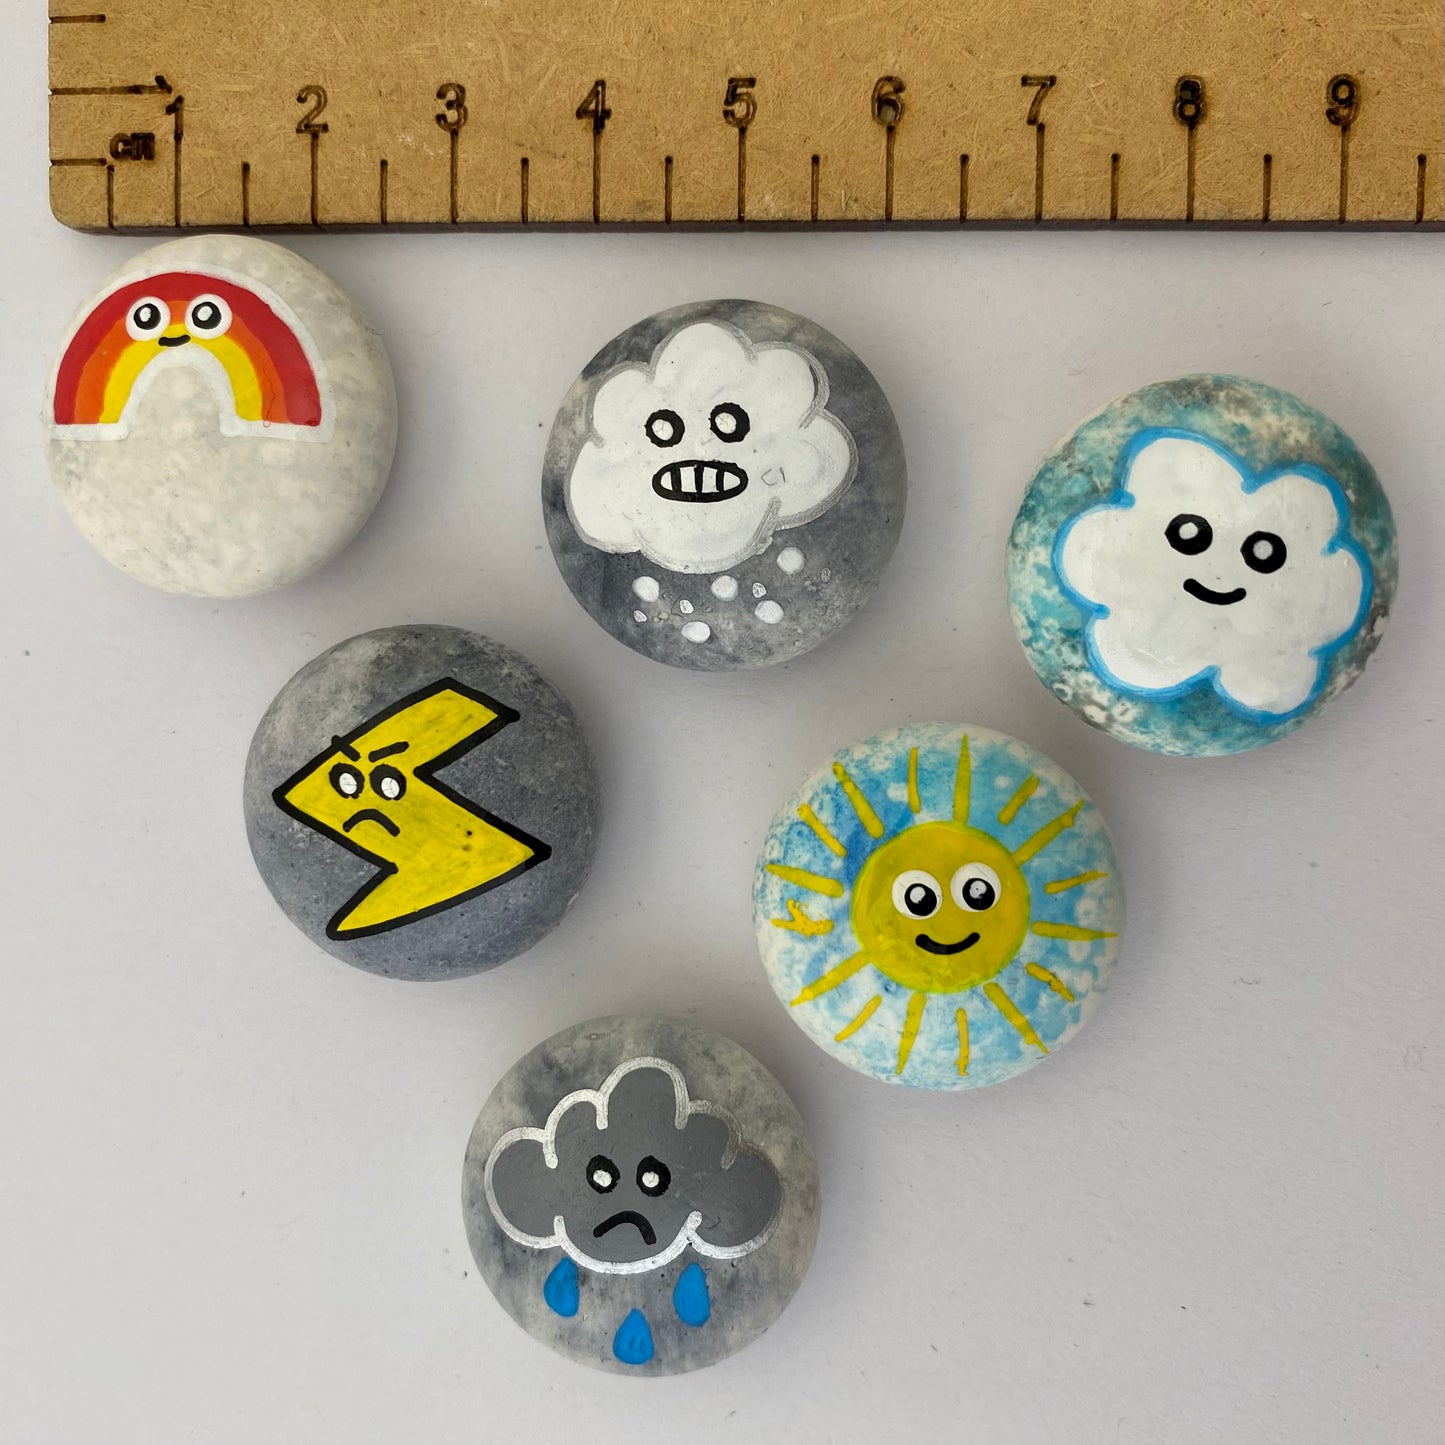 6 small hand painted weather themed pebbles next to a ruler